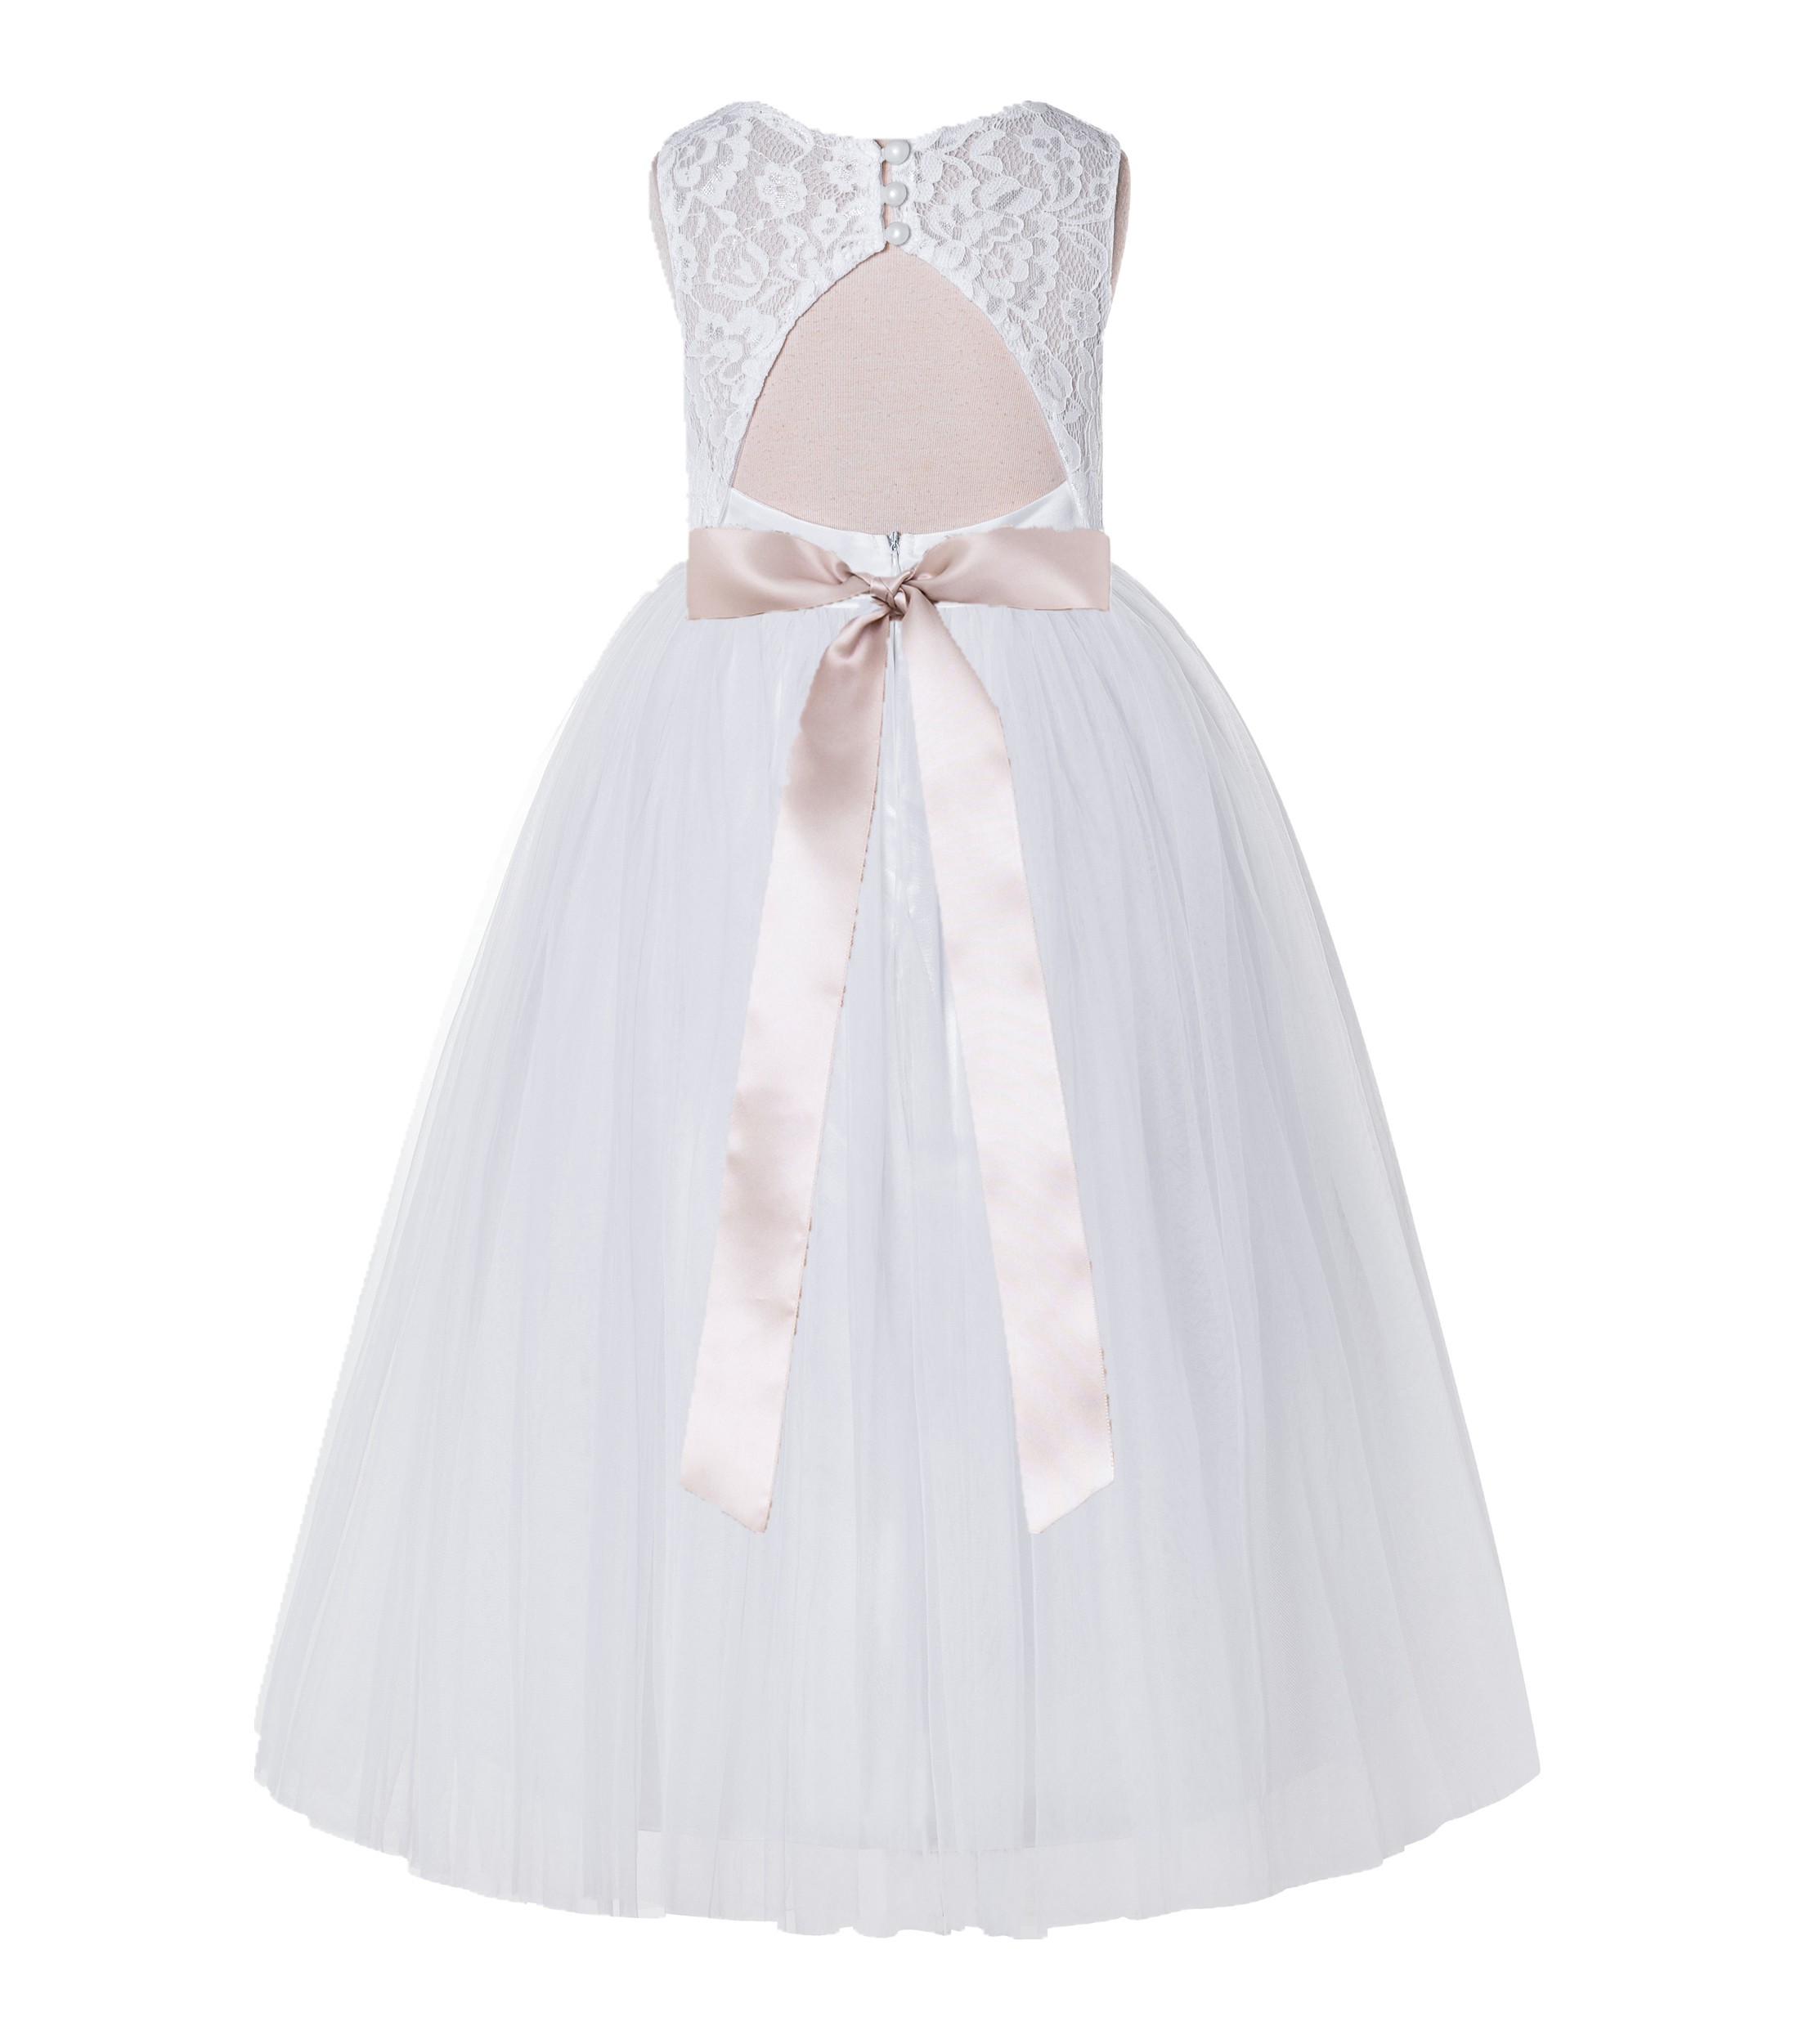 White / Blush Pink Tulle A-Line Lace Flower Girl Dress 178